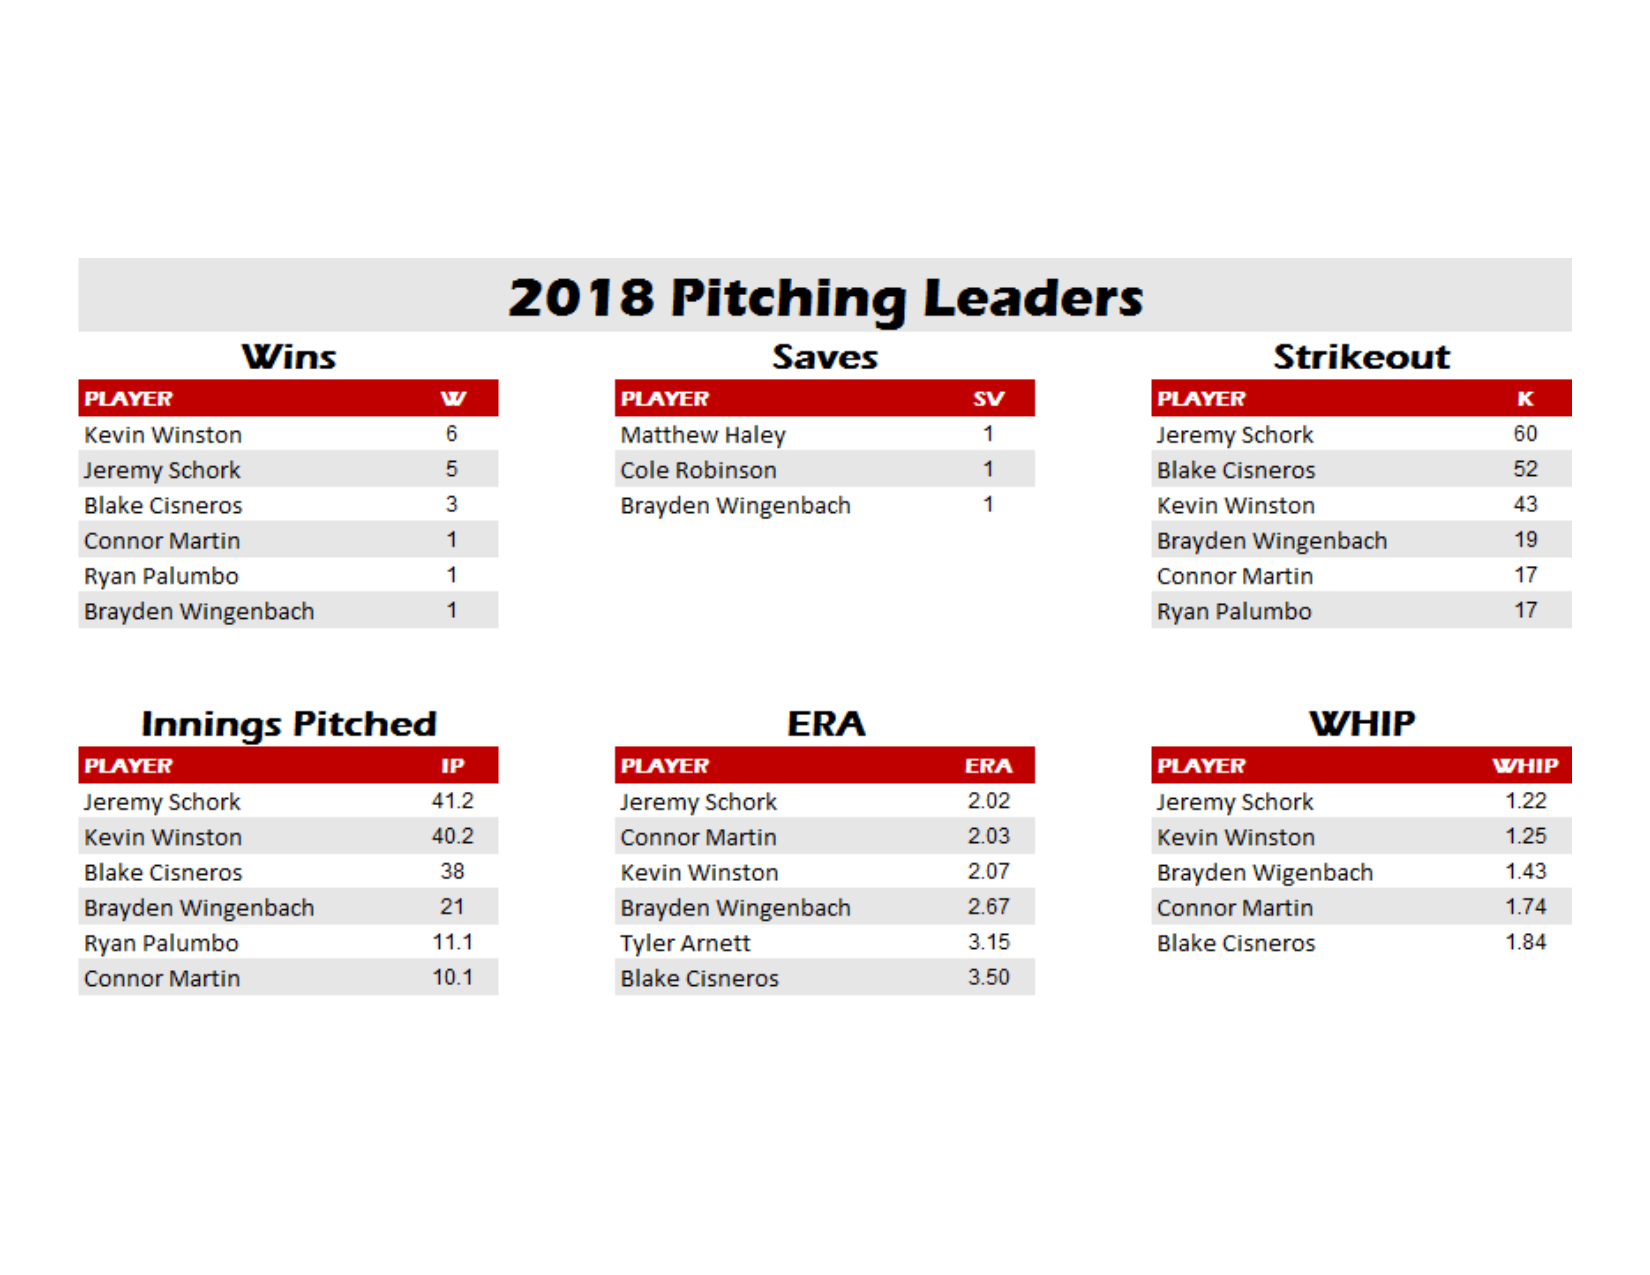 2018 pitching leaders